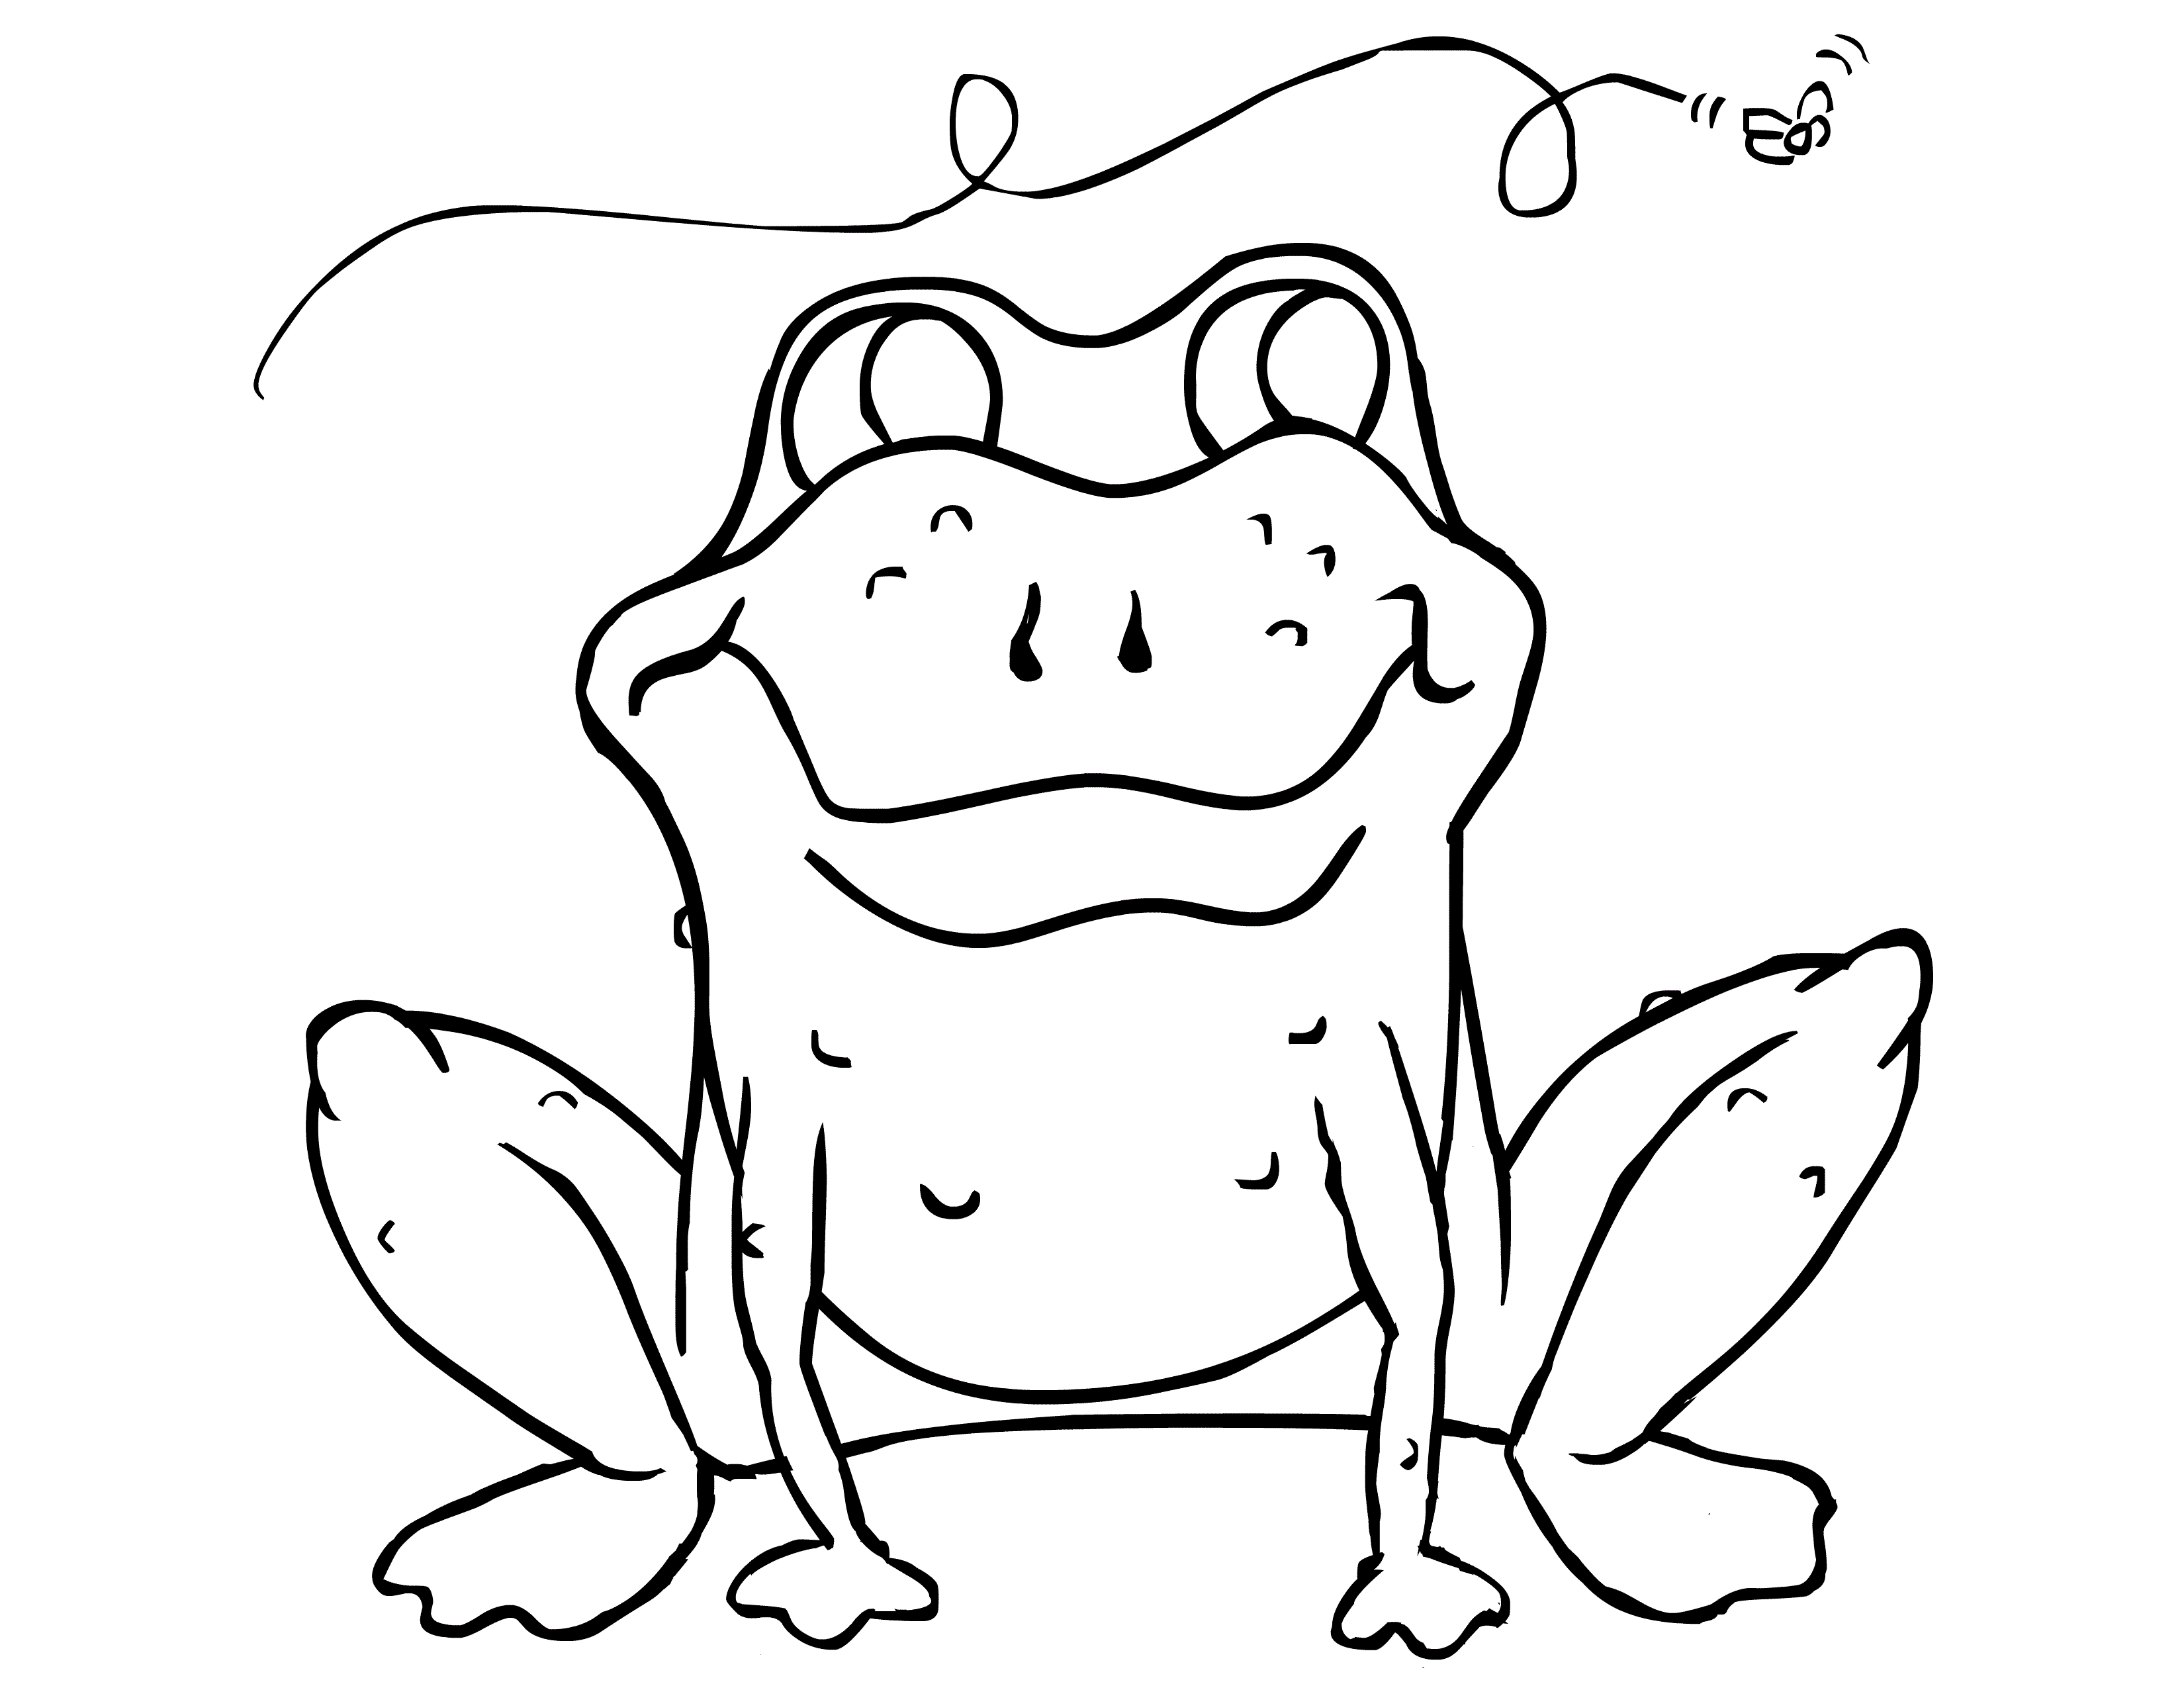 Download Free Printable Frog Coloring Pages For Kids